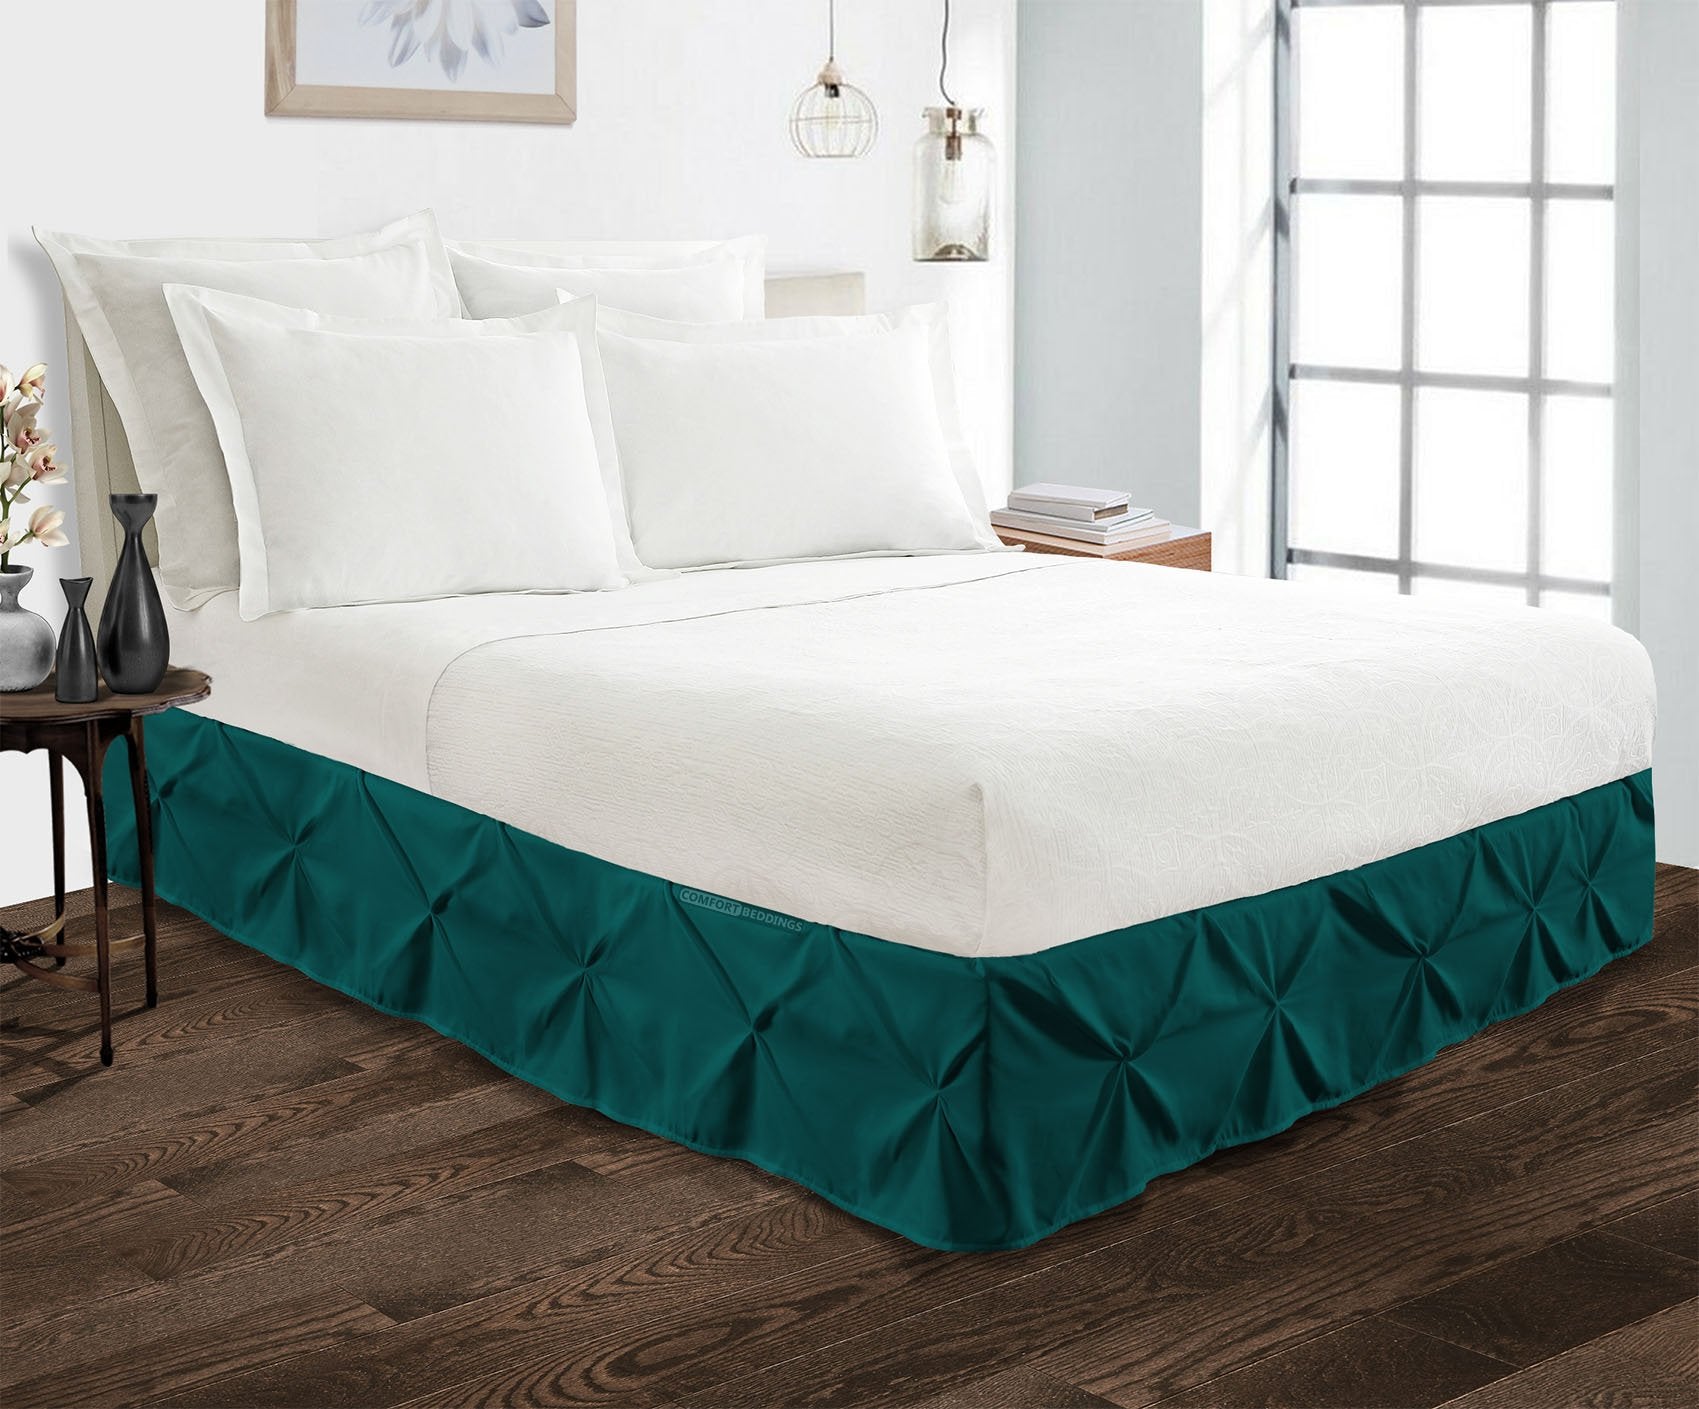 Teal Pinch Bed Skirt 